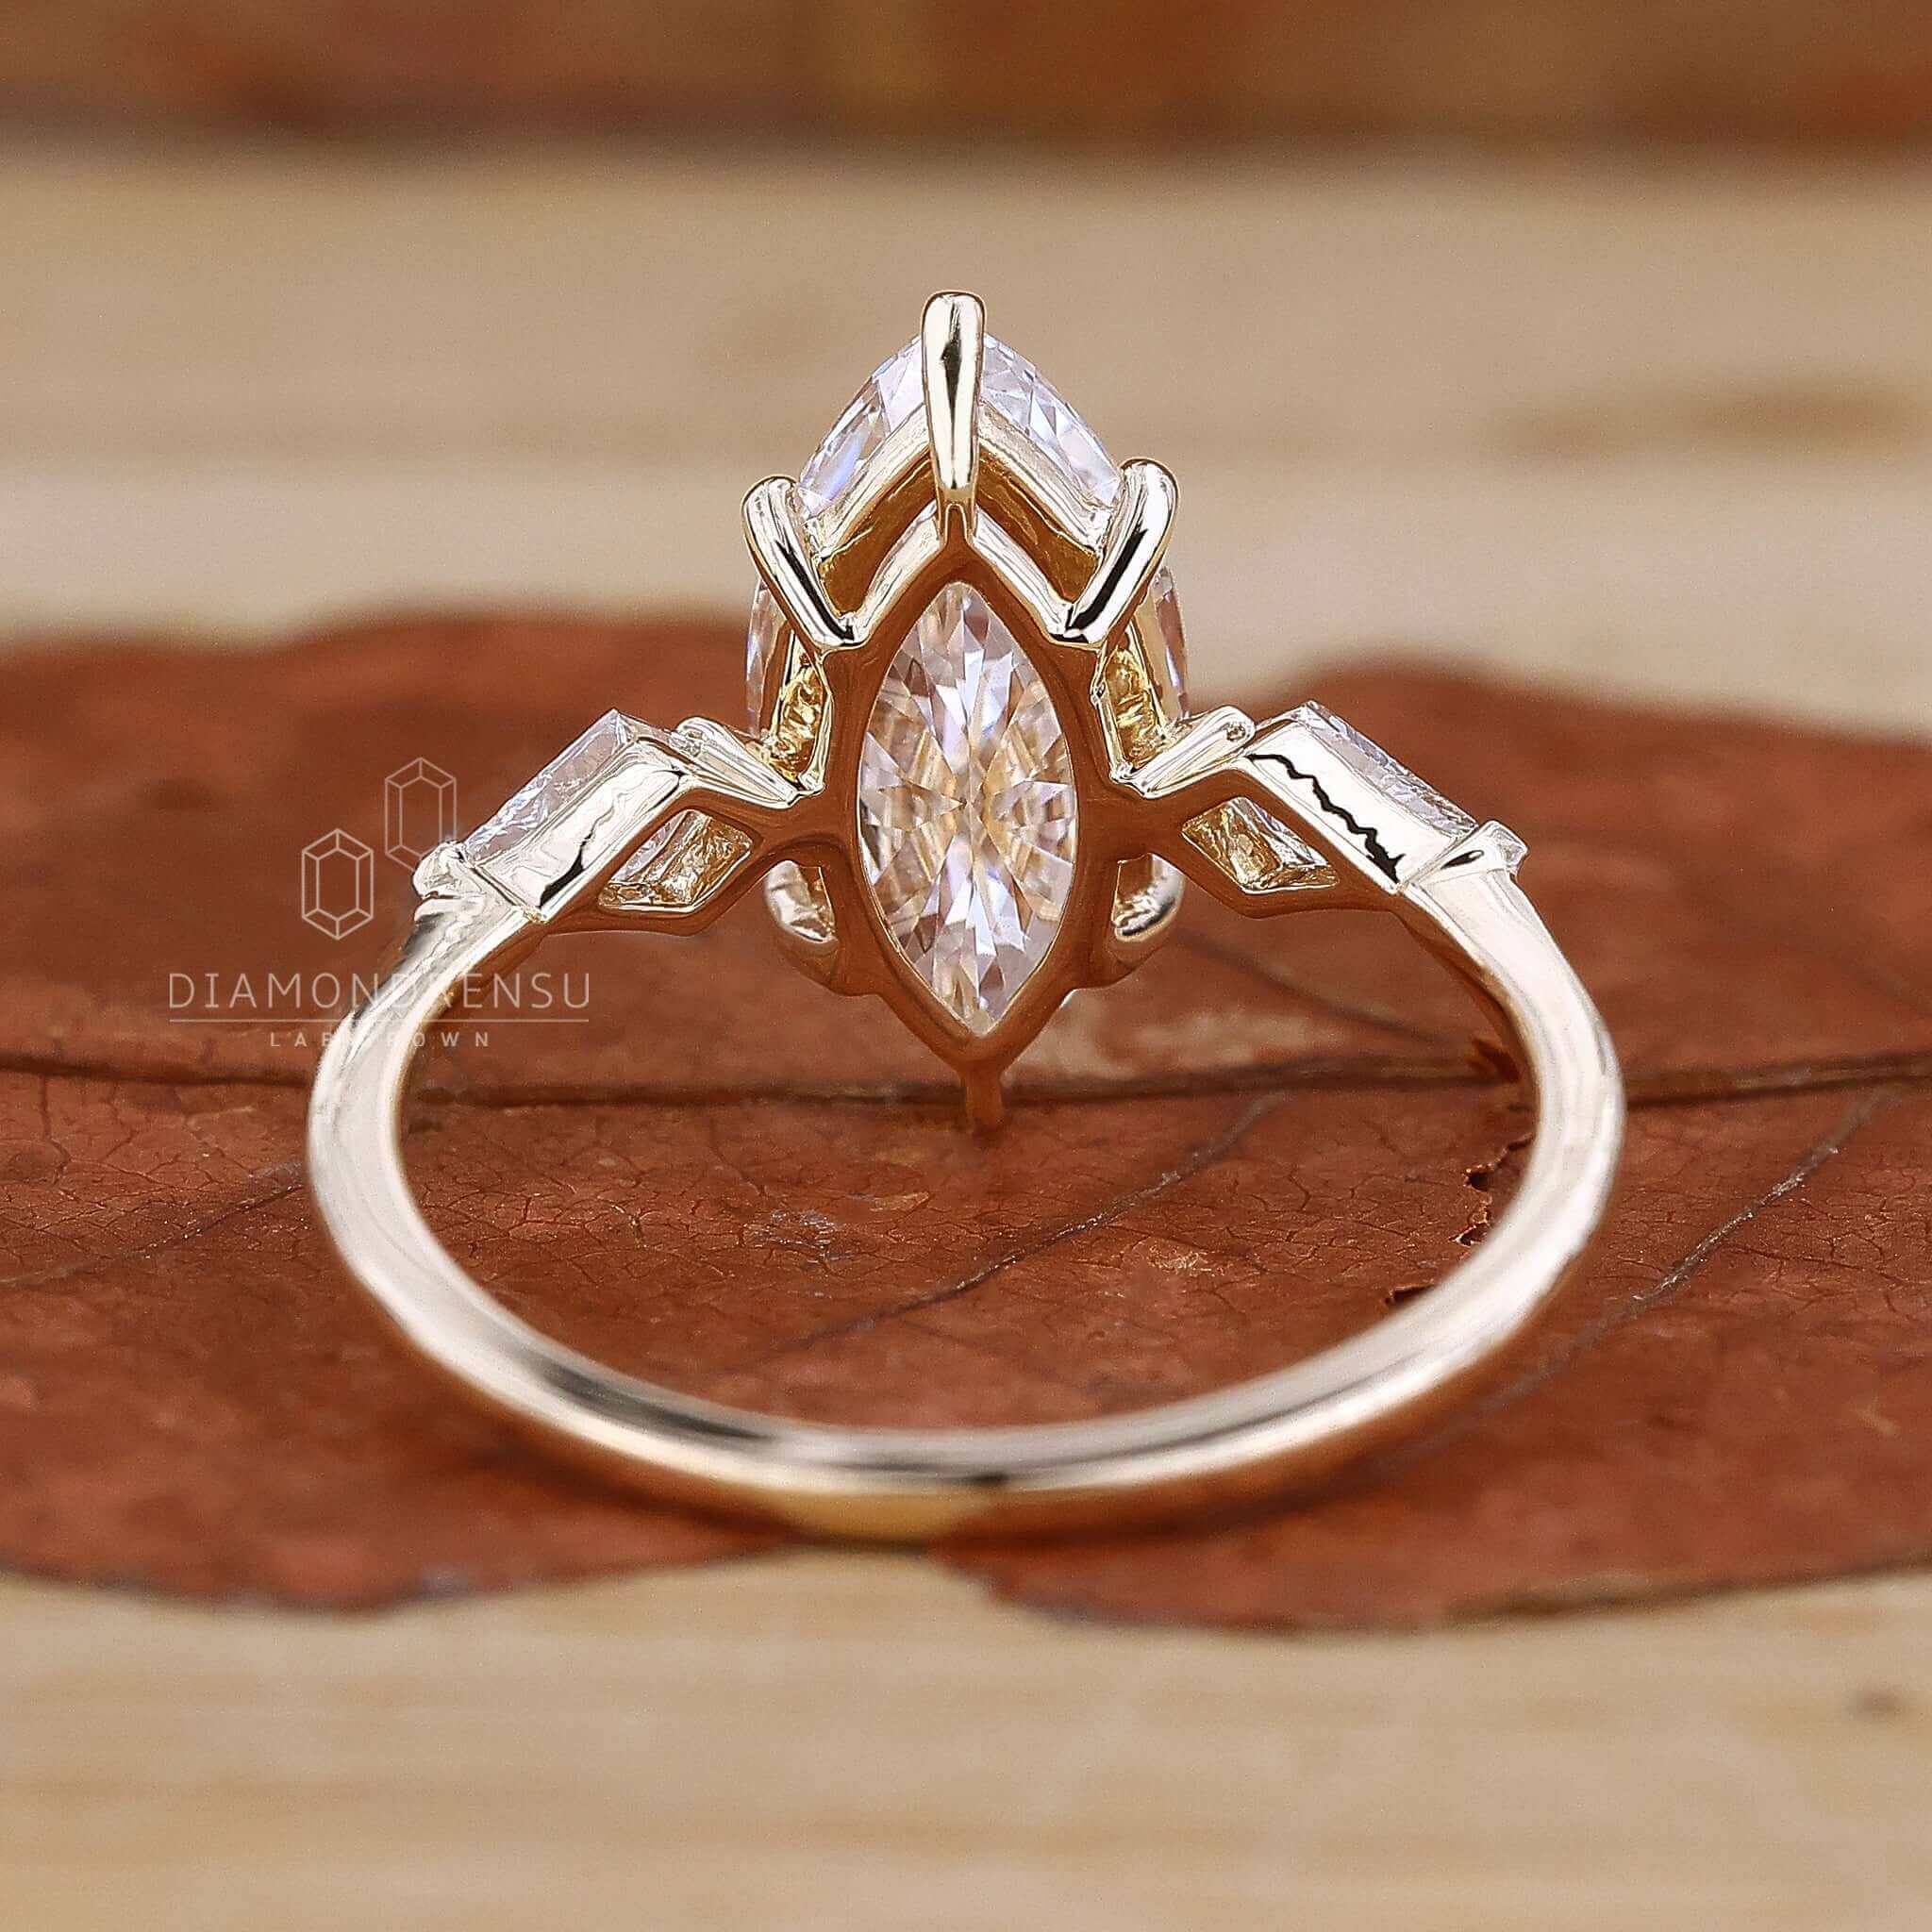 A three-stone engagement ring, representing past, present, and future love.